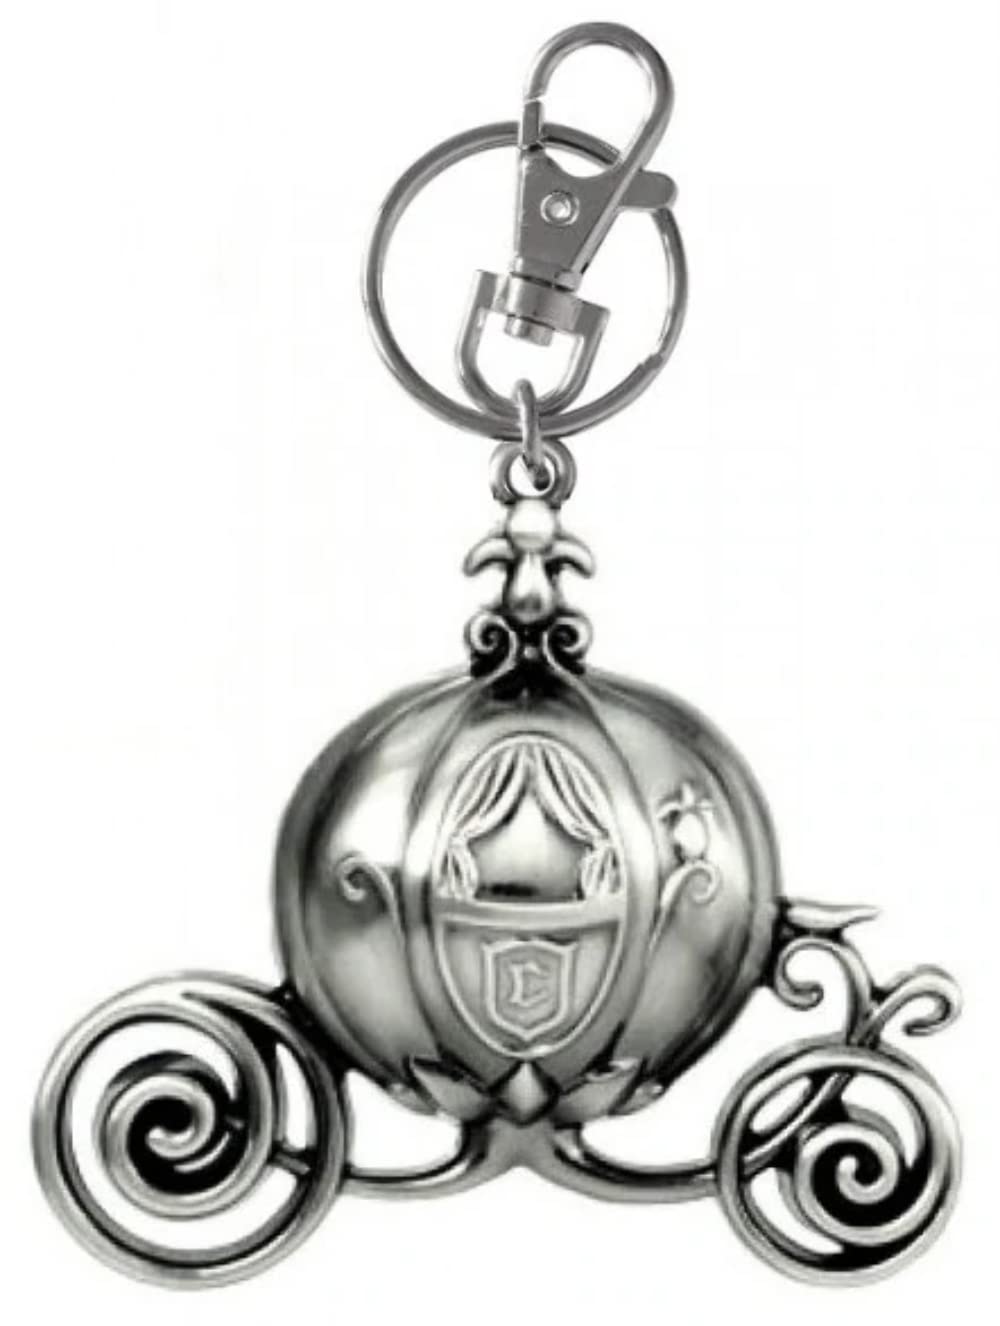 Disney Cinderella Carriage Pewter Key Ring Collectible Multi-colored, 3"